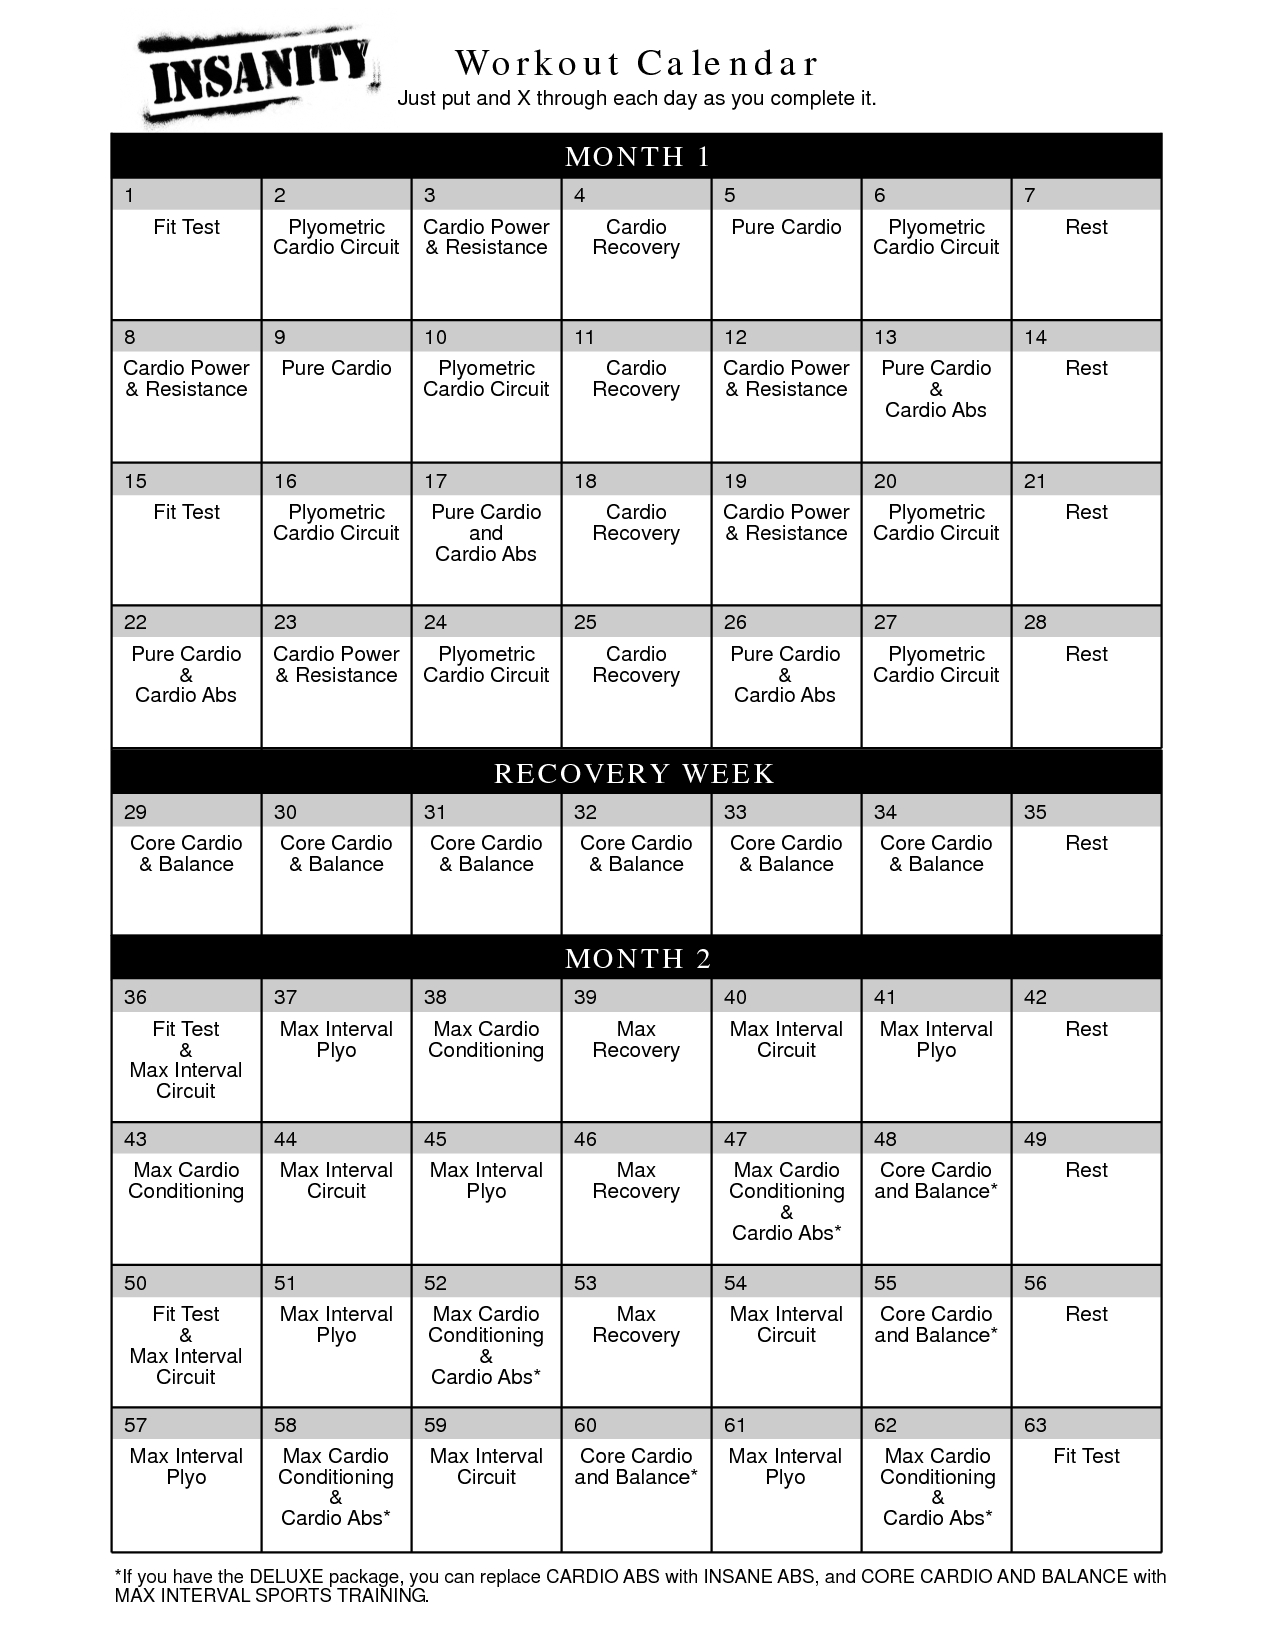 Month 1 And Month 2 Workouts Of Insanity.60 Day Schedule! You Can regarding Insanity Max 30 Calendar Month 2